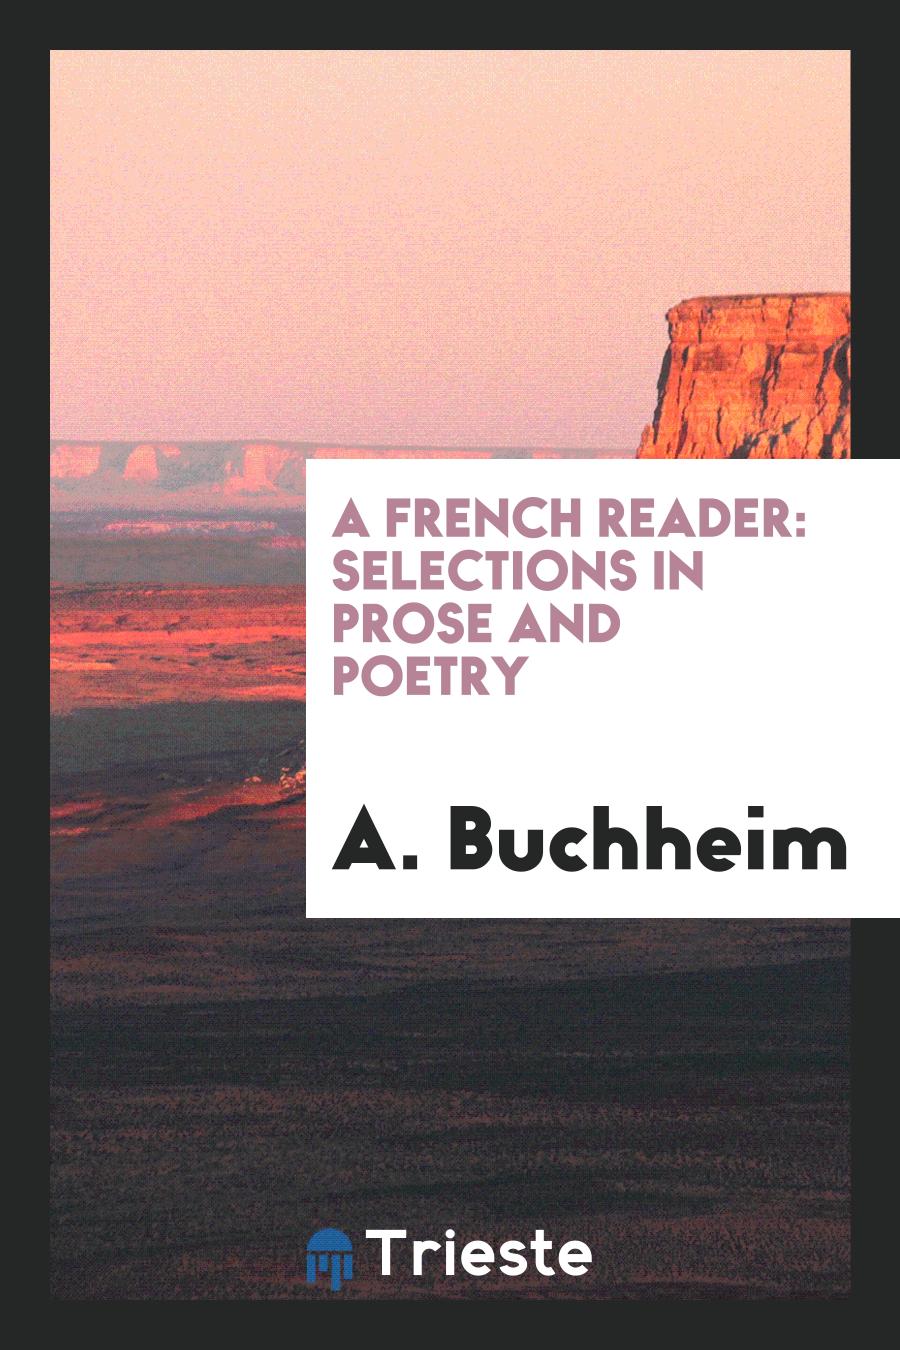 A French Reader: Selections in Prose and Poetry